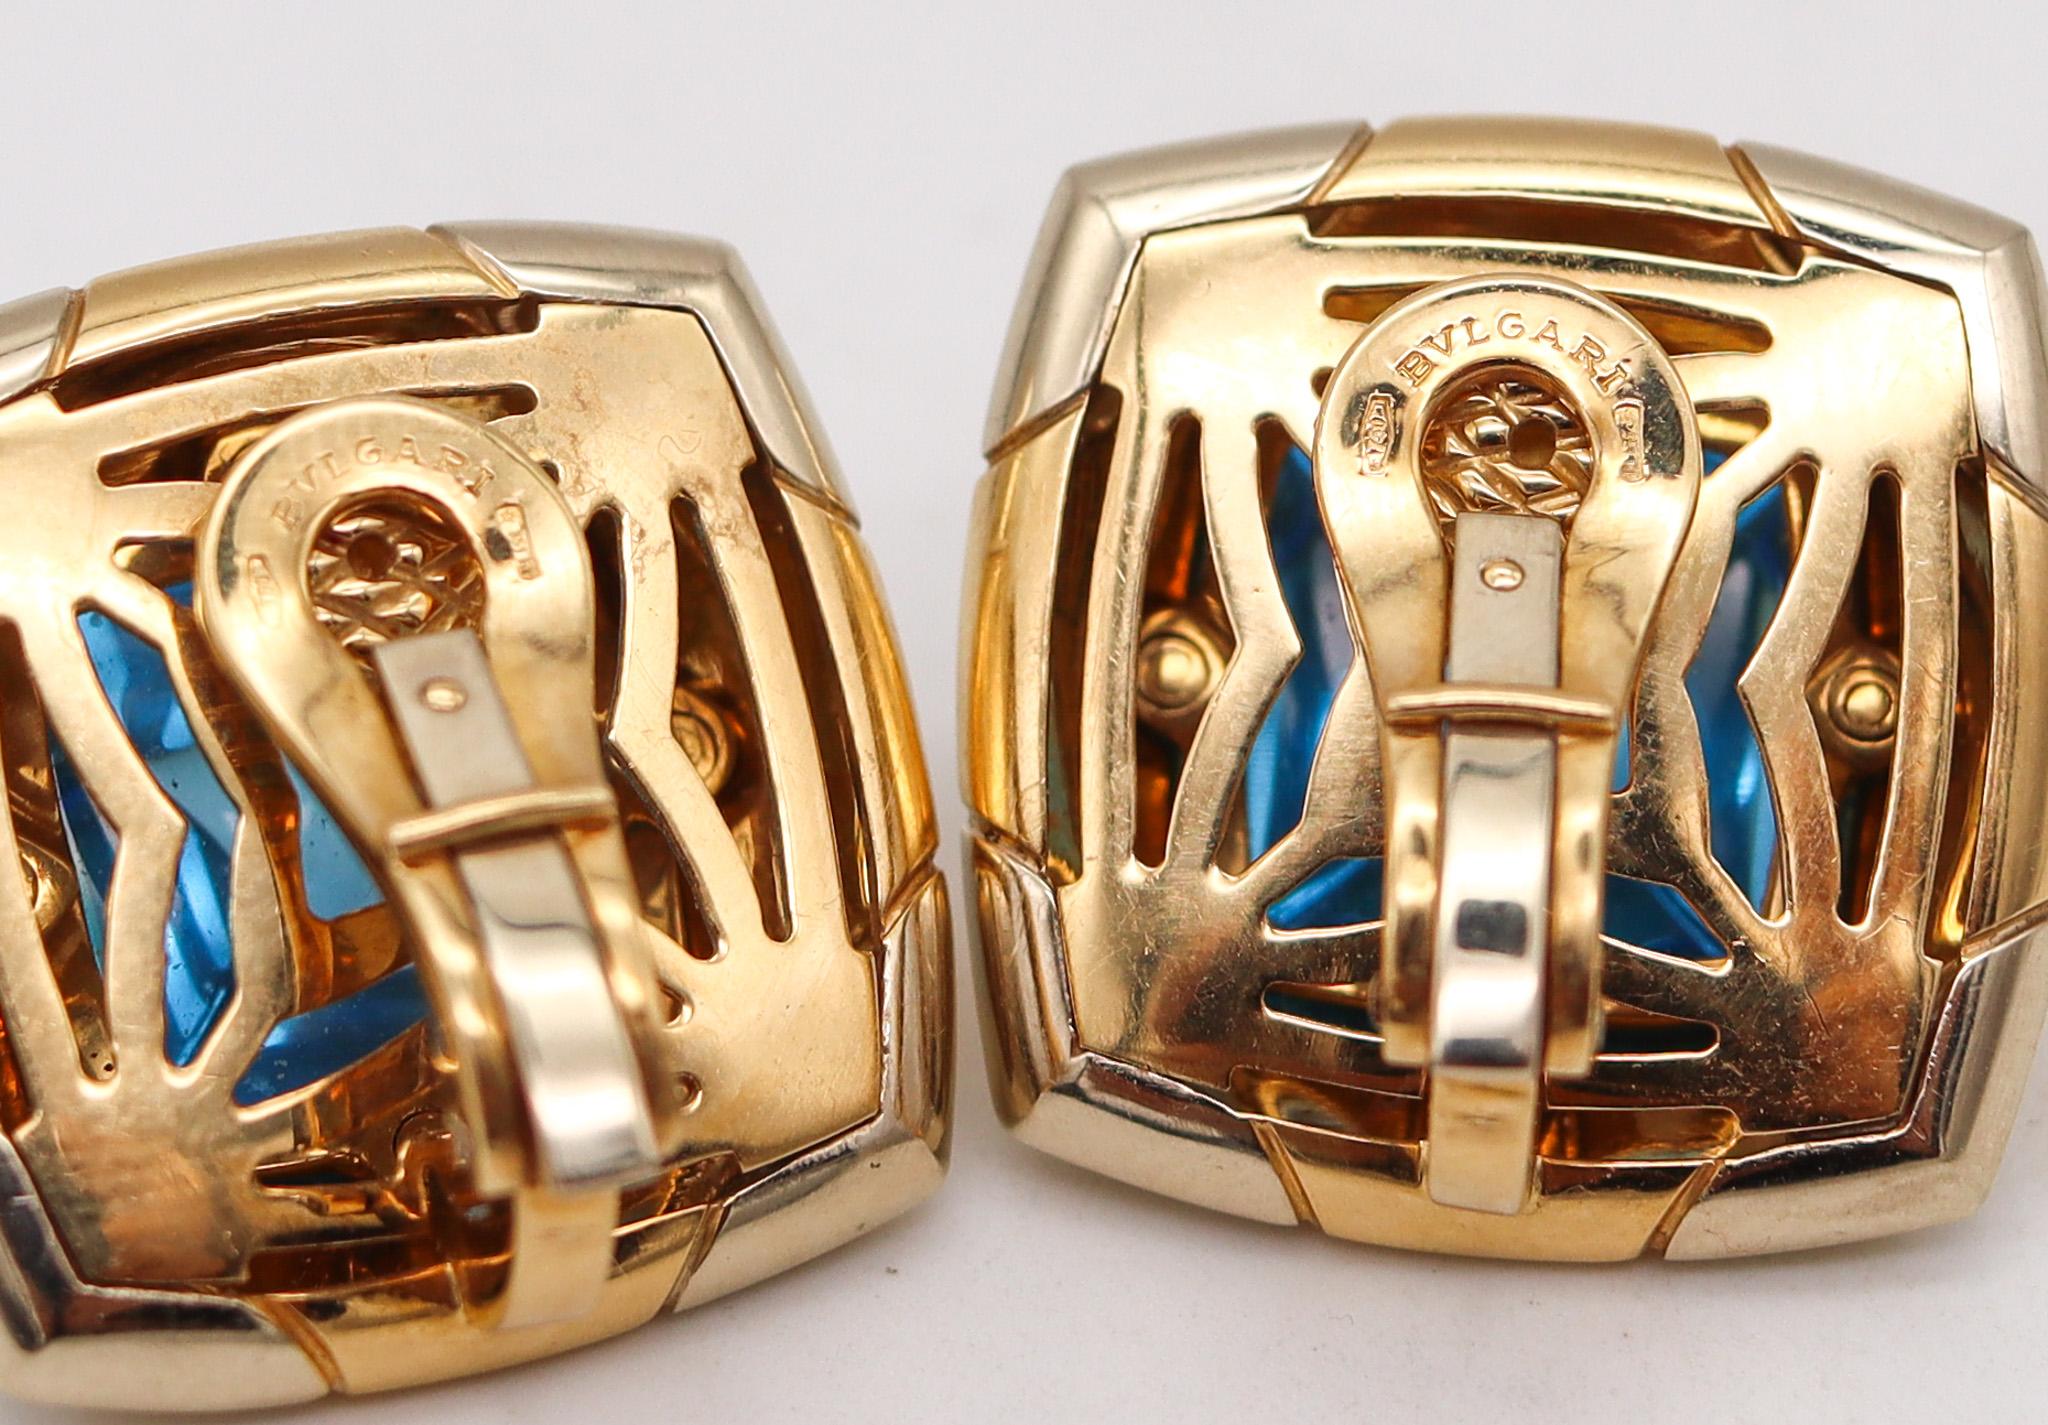 Sugarloaf Cabochon Bvlgari Roma Pyramid Clips Earrings in 18kt Gold with 36ctw Carved Blue Topaz For Sale